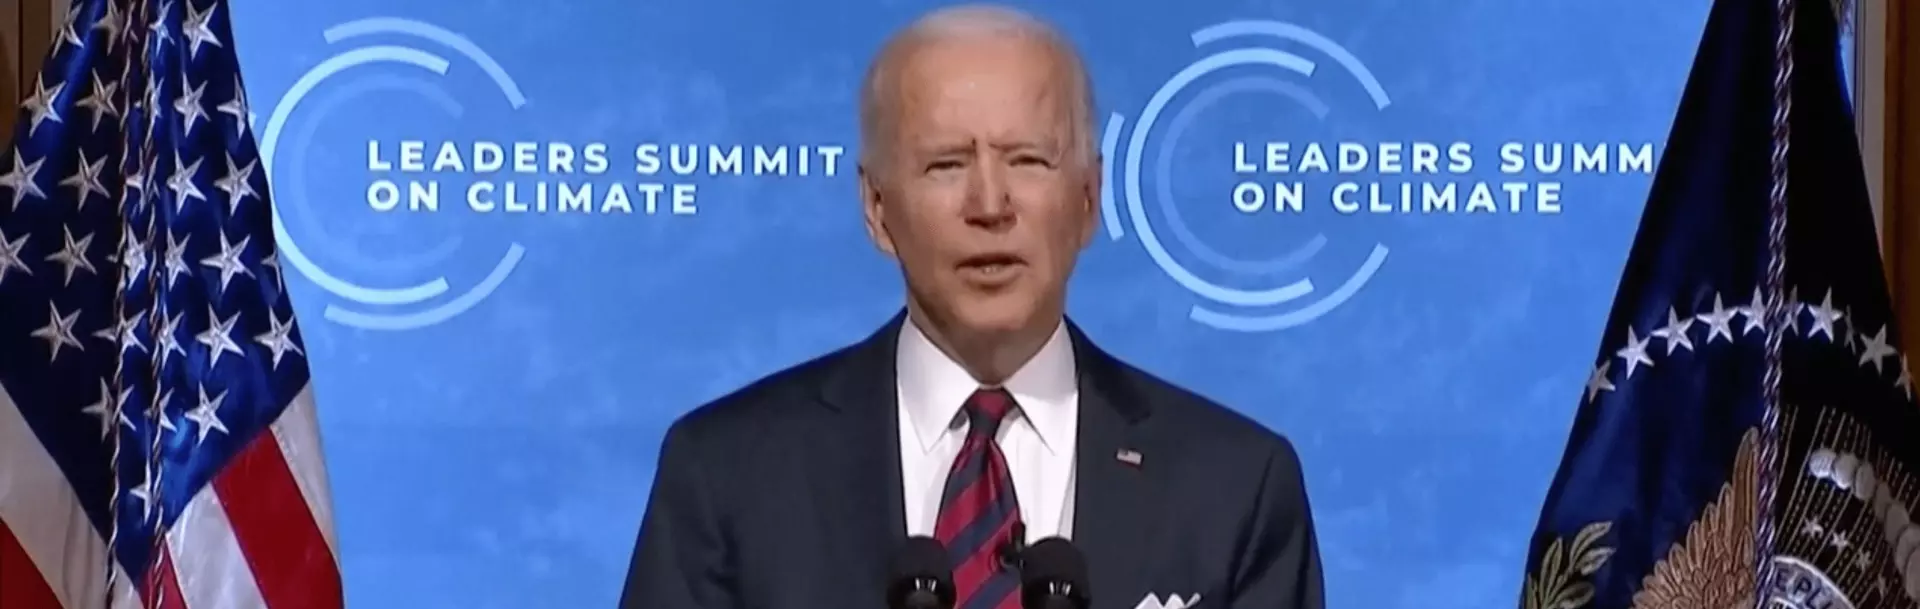  Climate Summit 2021: President Joe Biden Announces the United States Will Aim to Cut Carbon Emissions by as Much as 52% by 2030 